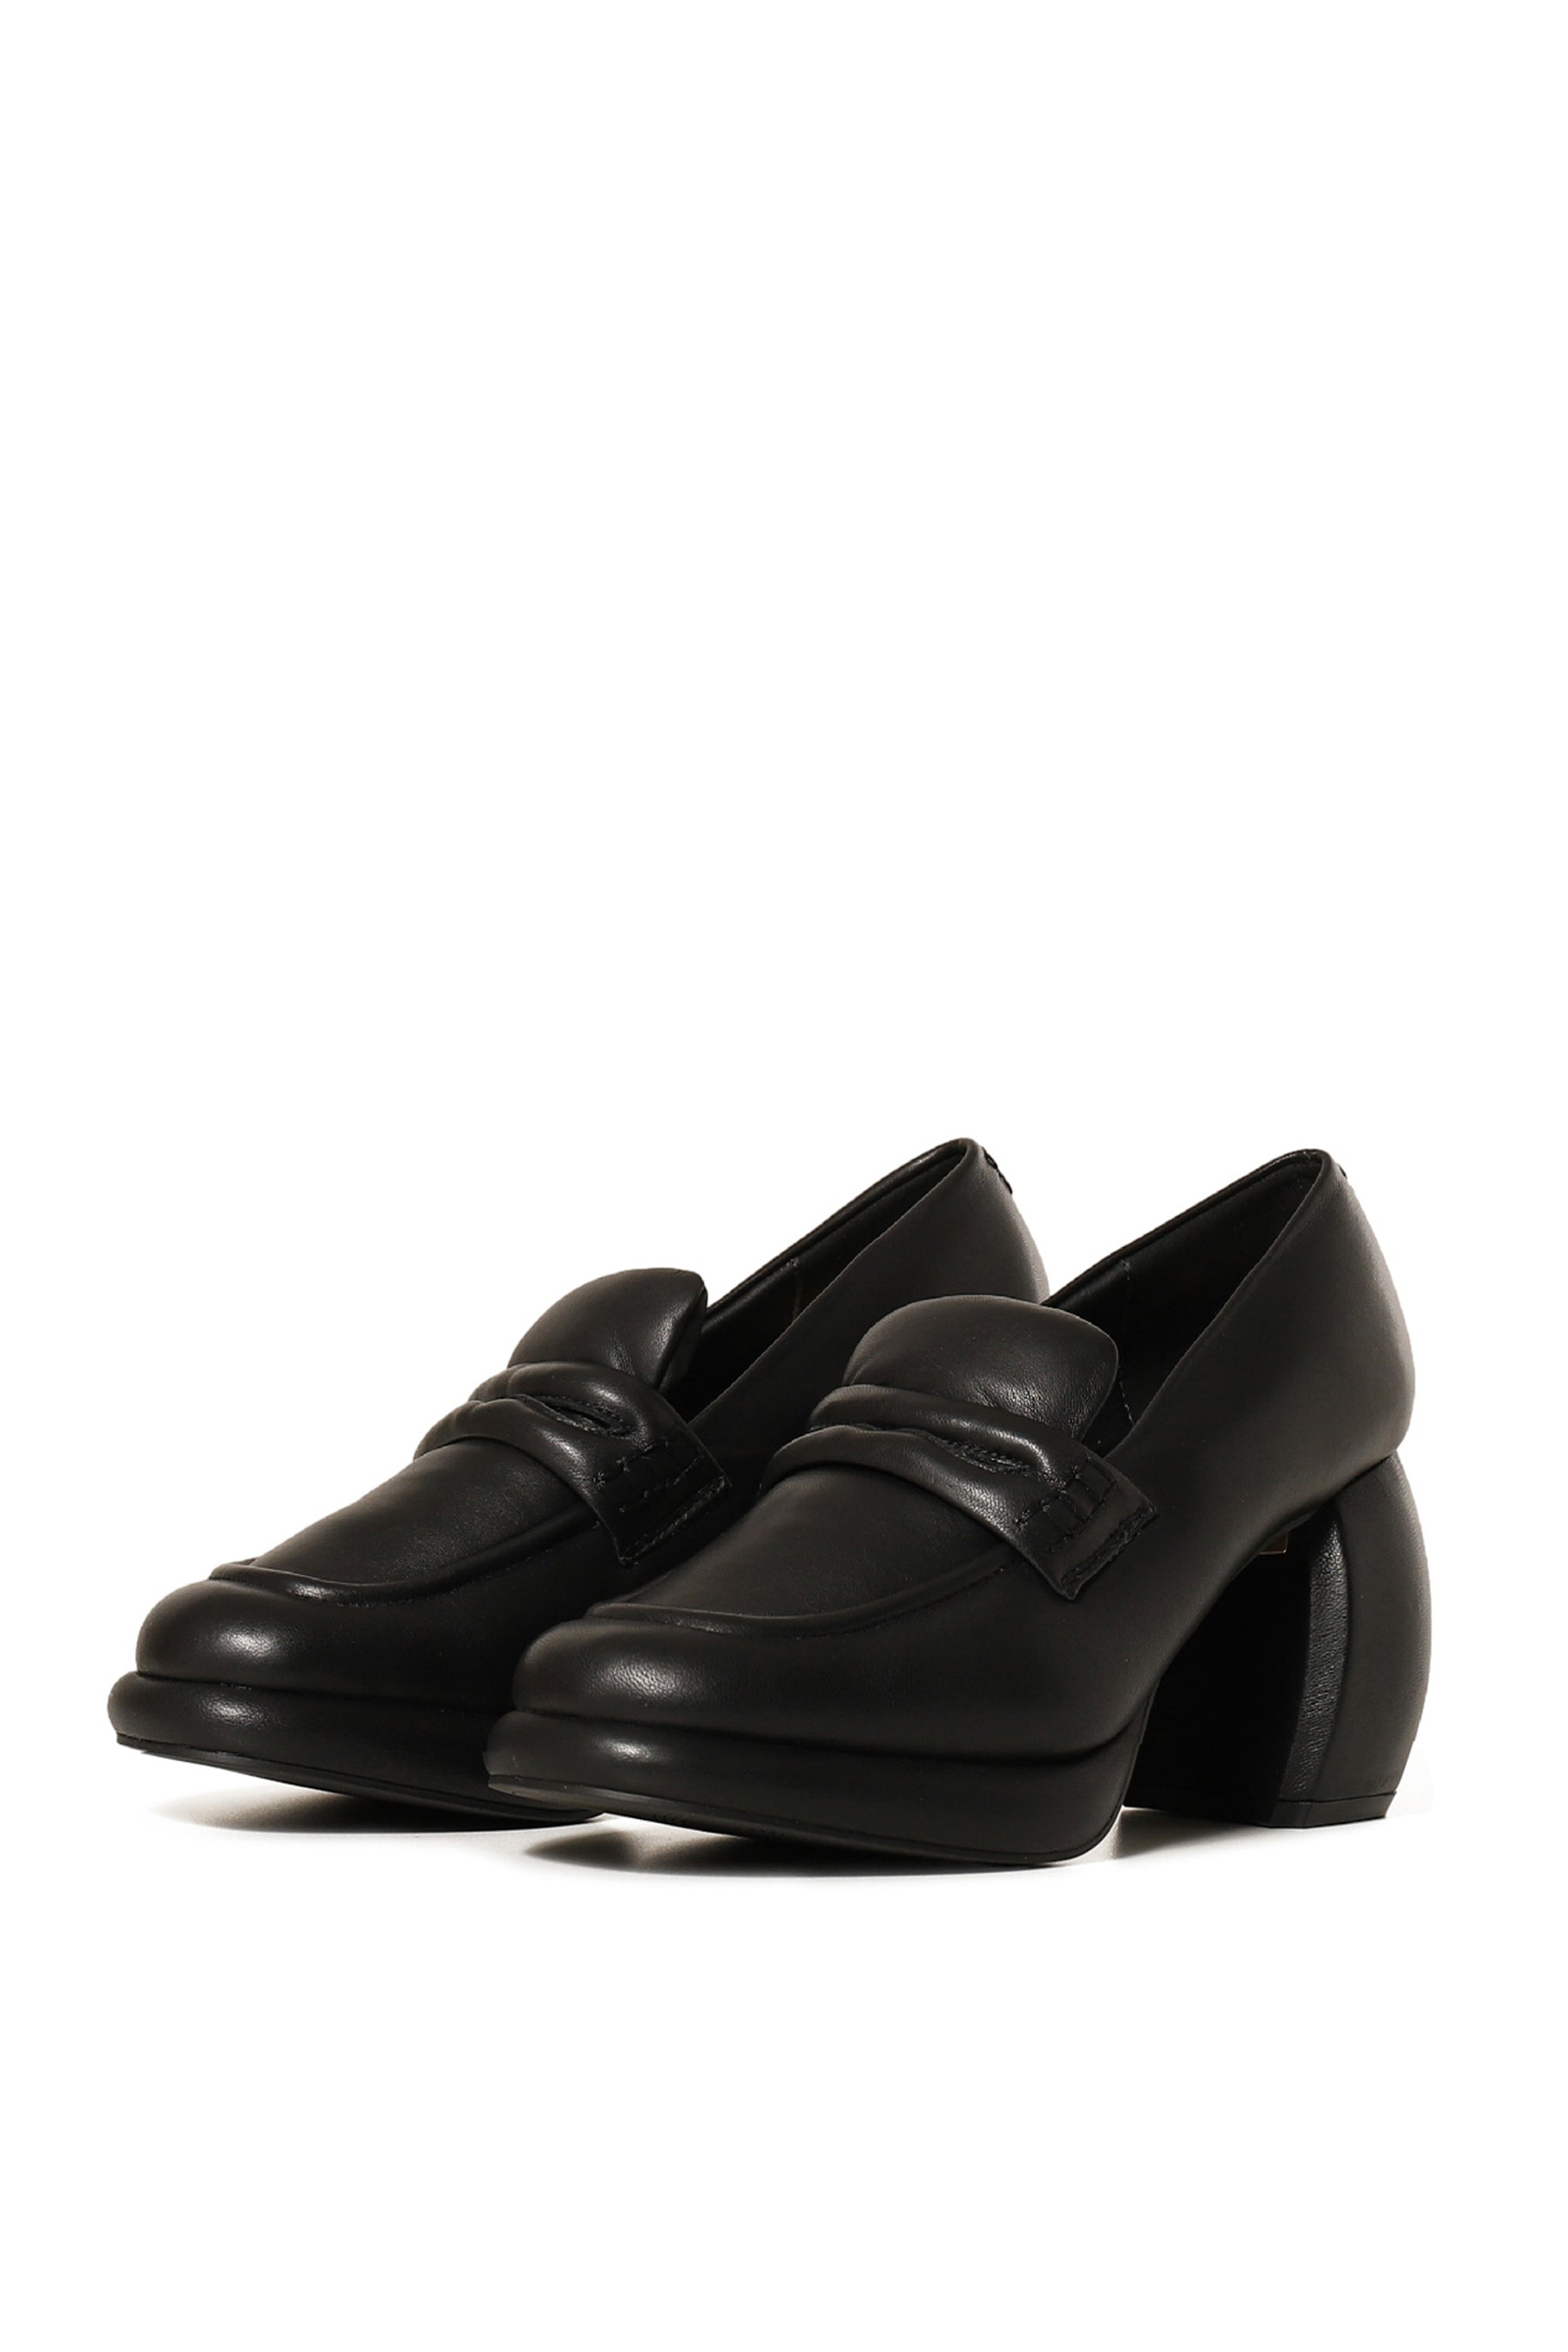 THE LOAFER1 / BLACK LEATHER